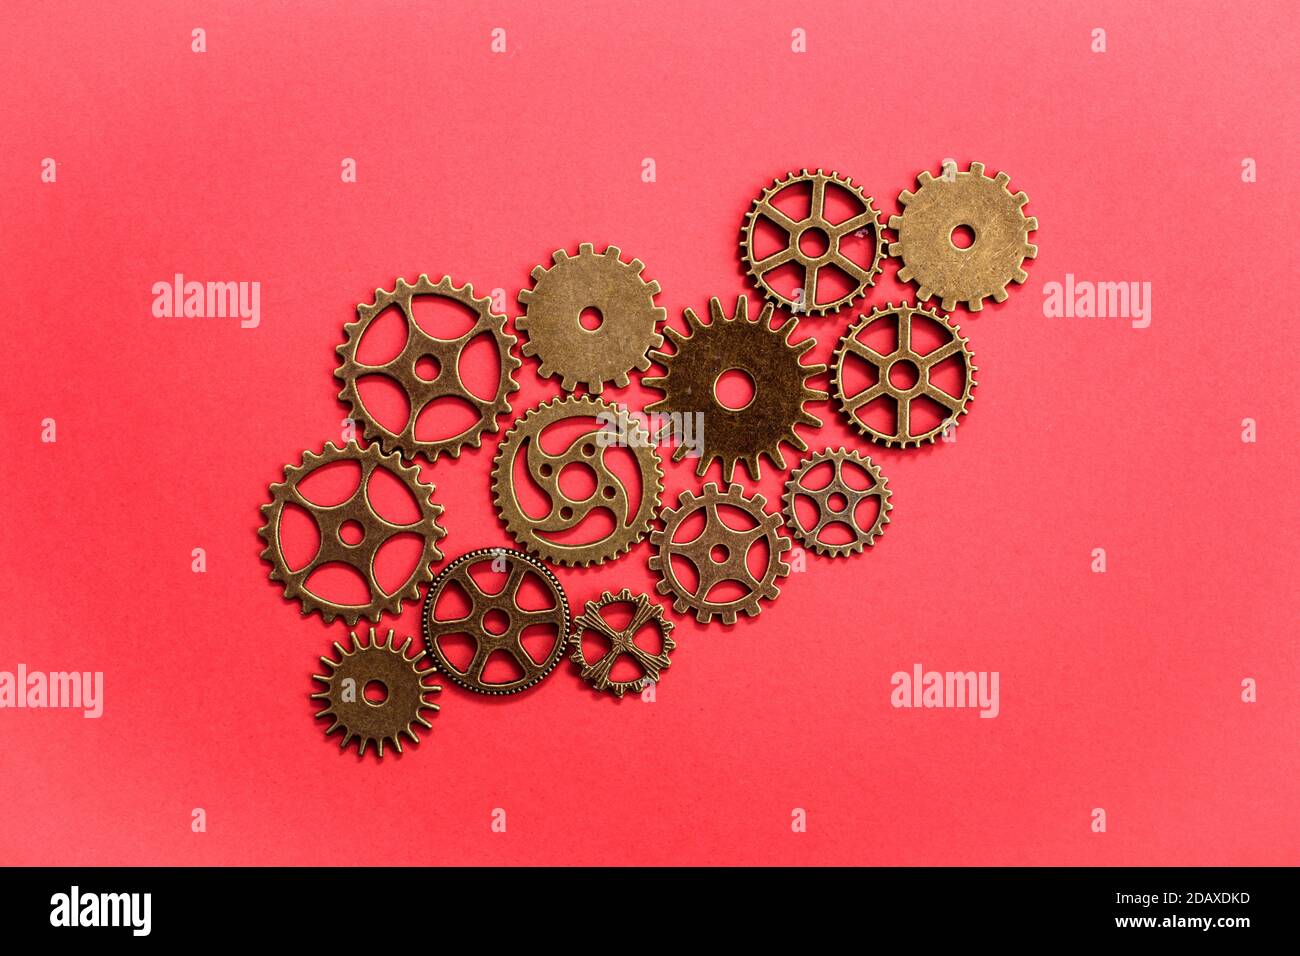 Various gears over red background Stock Photo